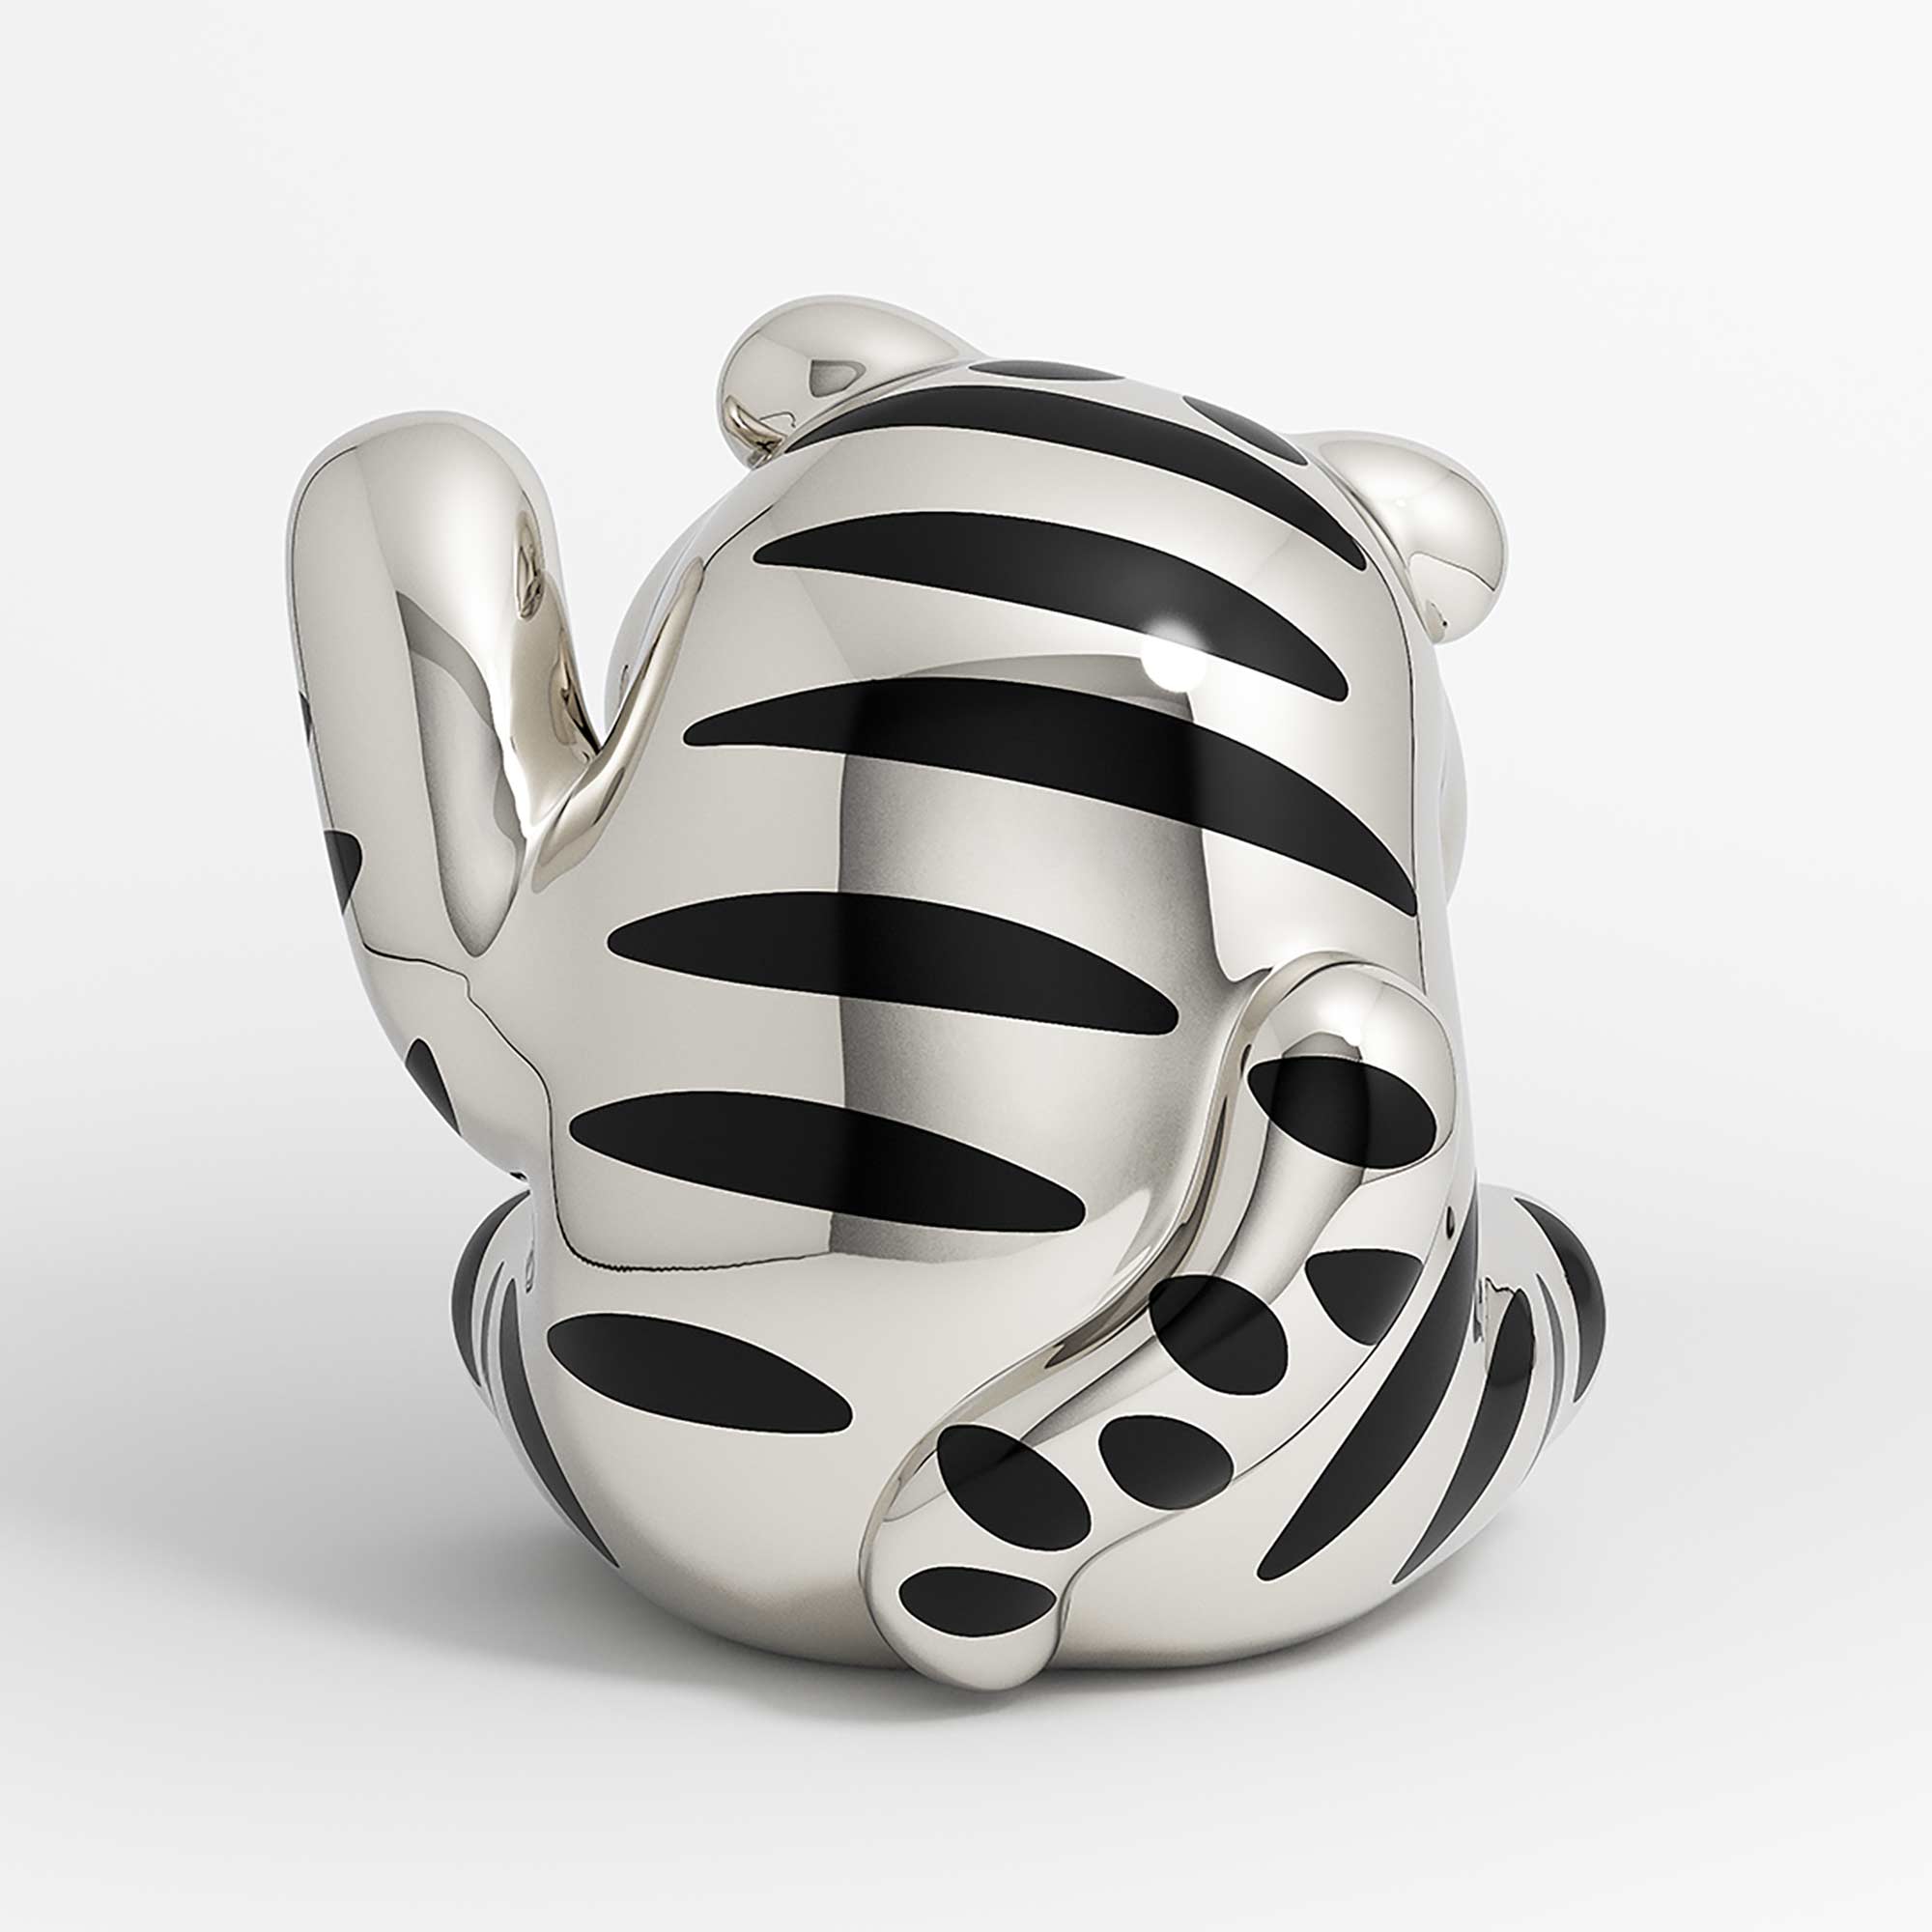 Lucky Tiger Cub, tiger cat sculpture, Mirror Polished Stainless Steel Sculpture, by artist Ferdi B Dick, back view